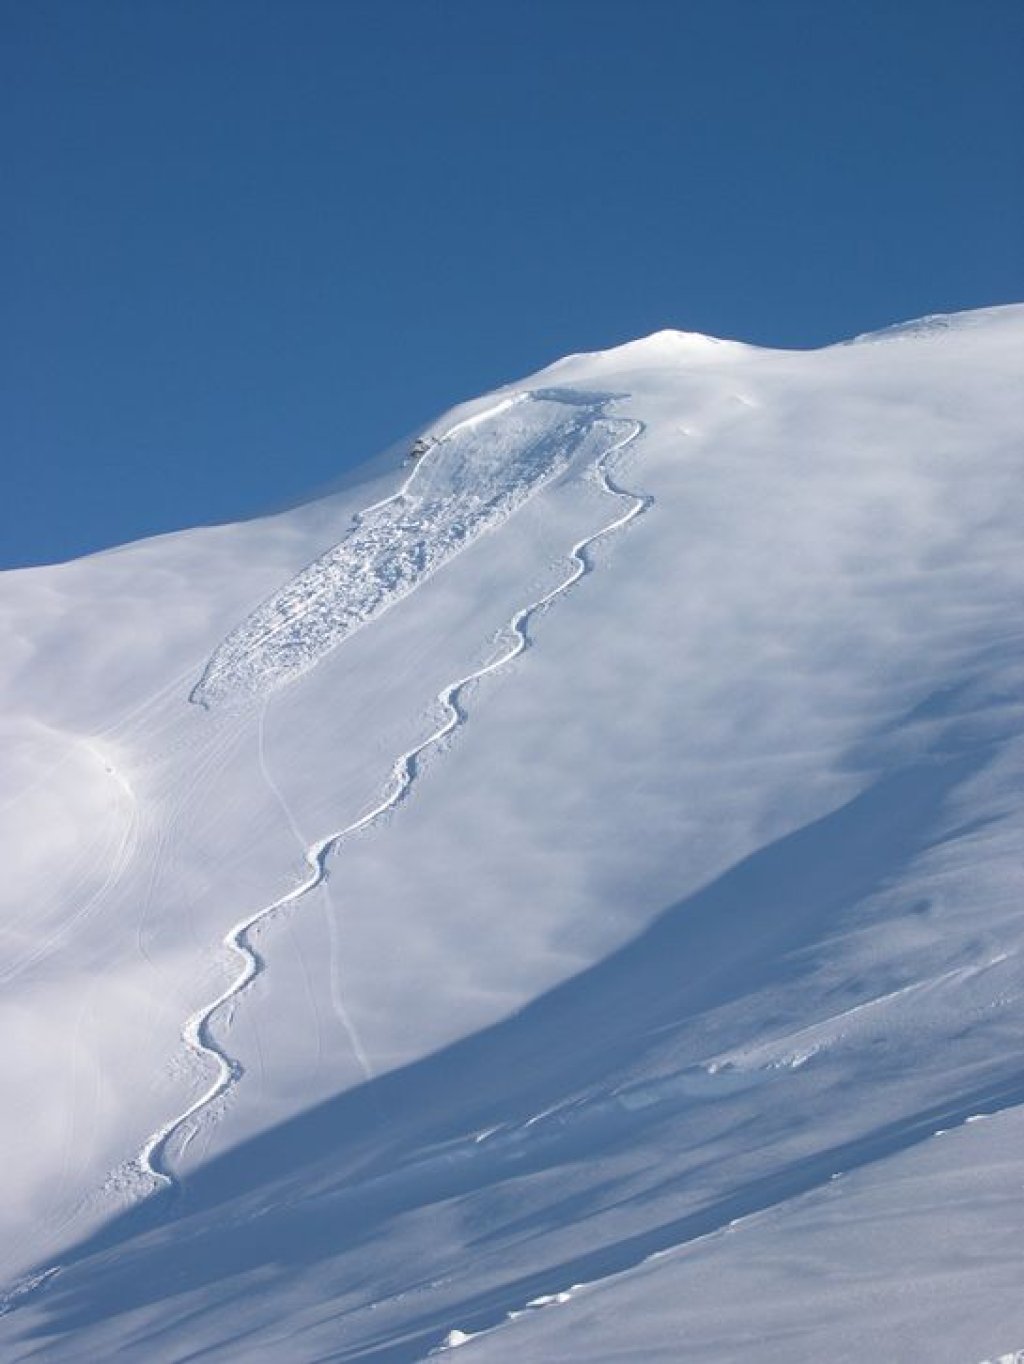 Size 1: Slide or small avalanche. Length 10 to 30m, volume approx. 100m3.